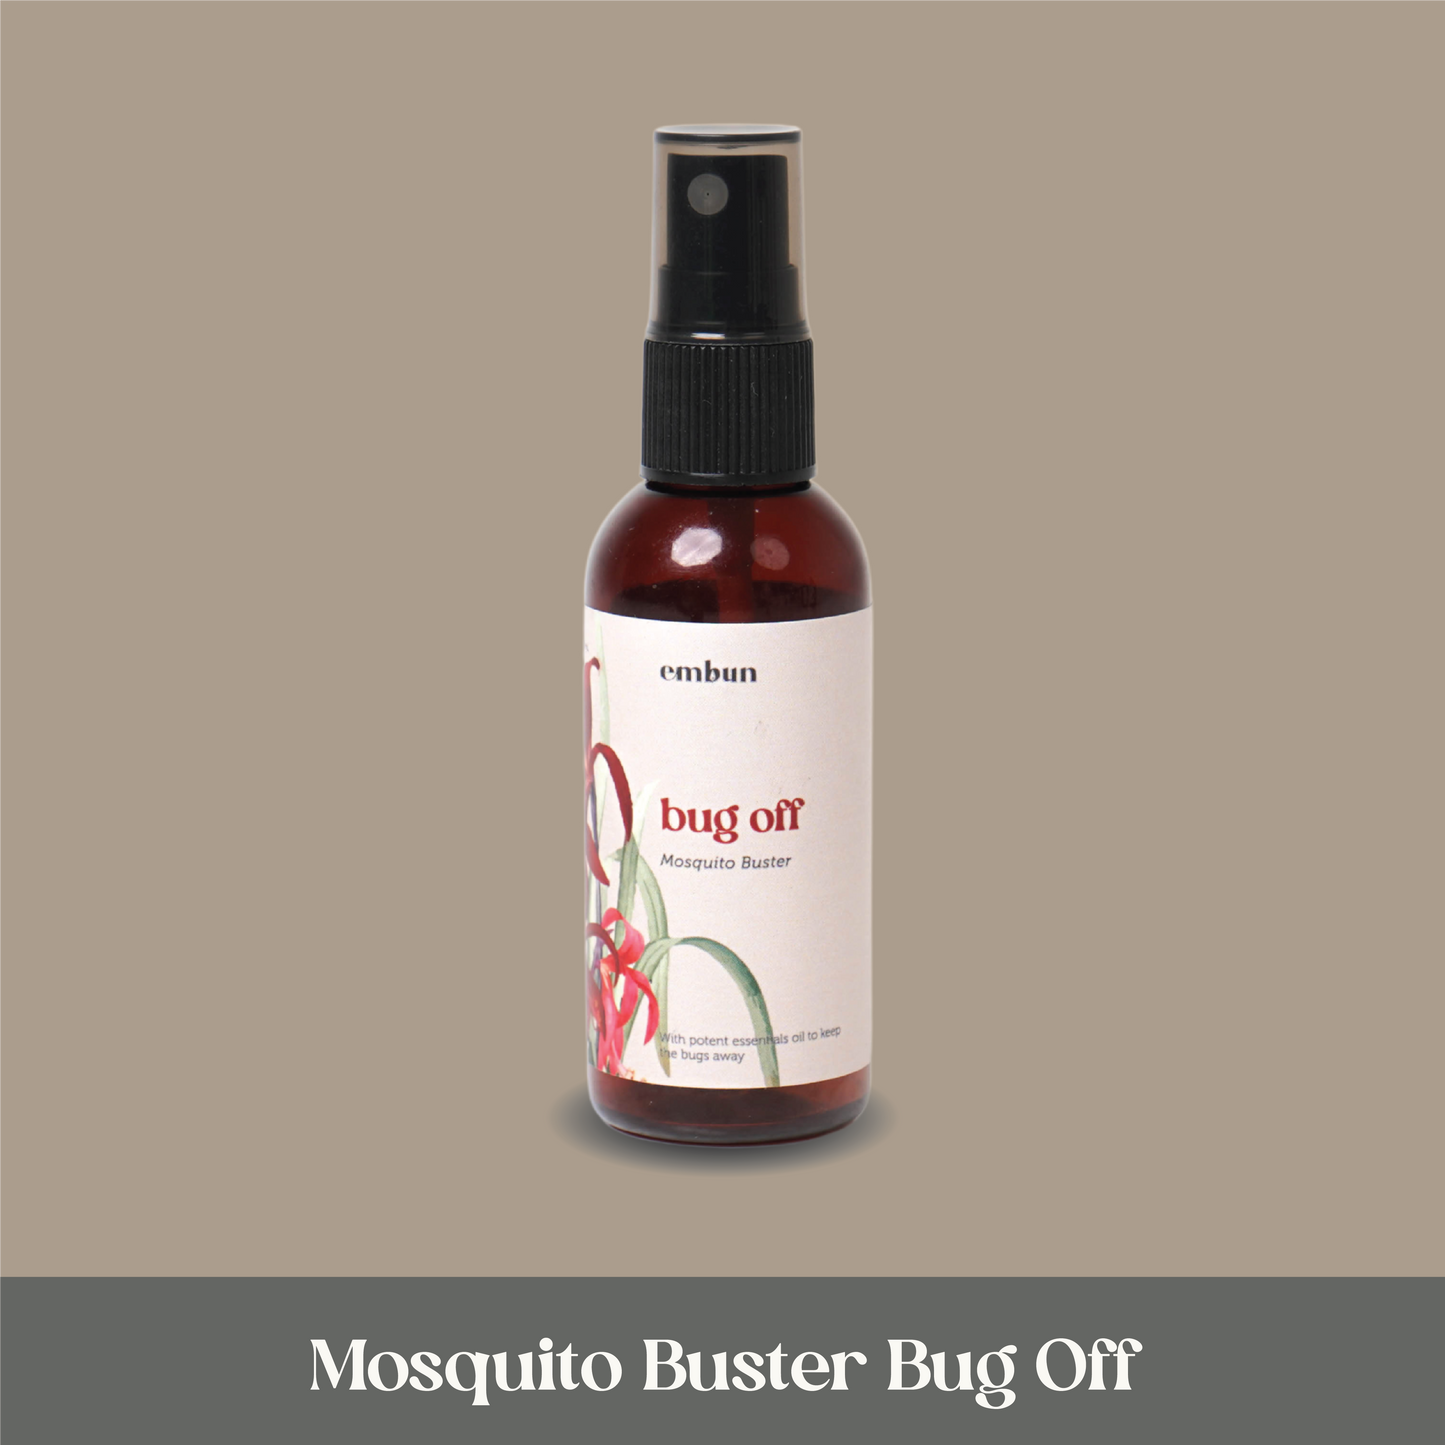 Mosquito Buster Bug Off 60 ml